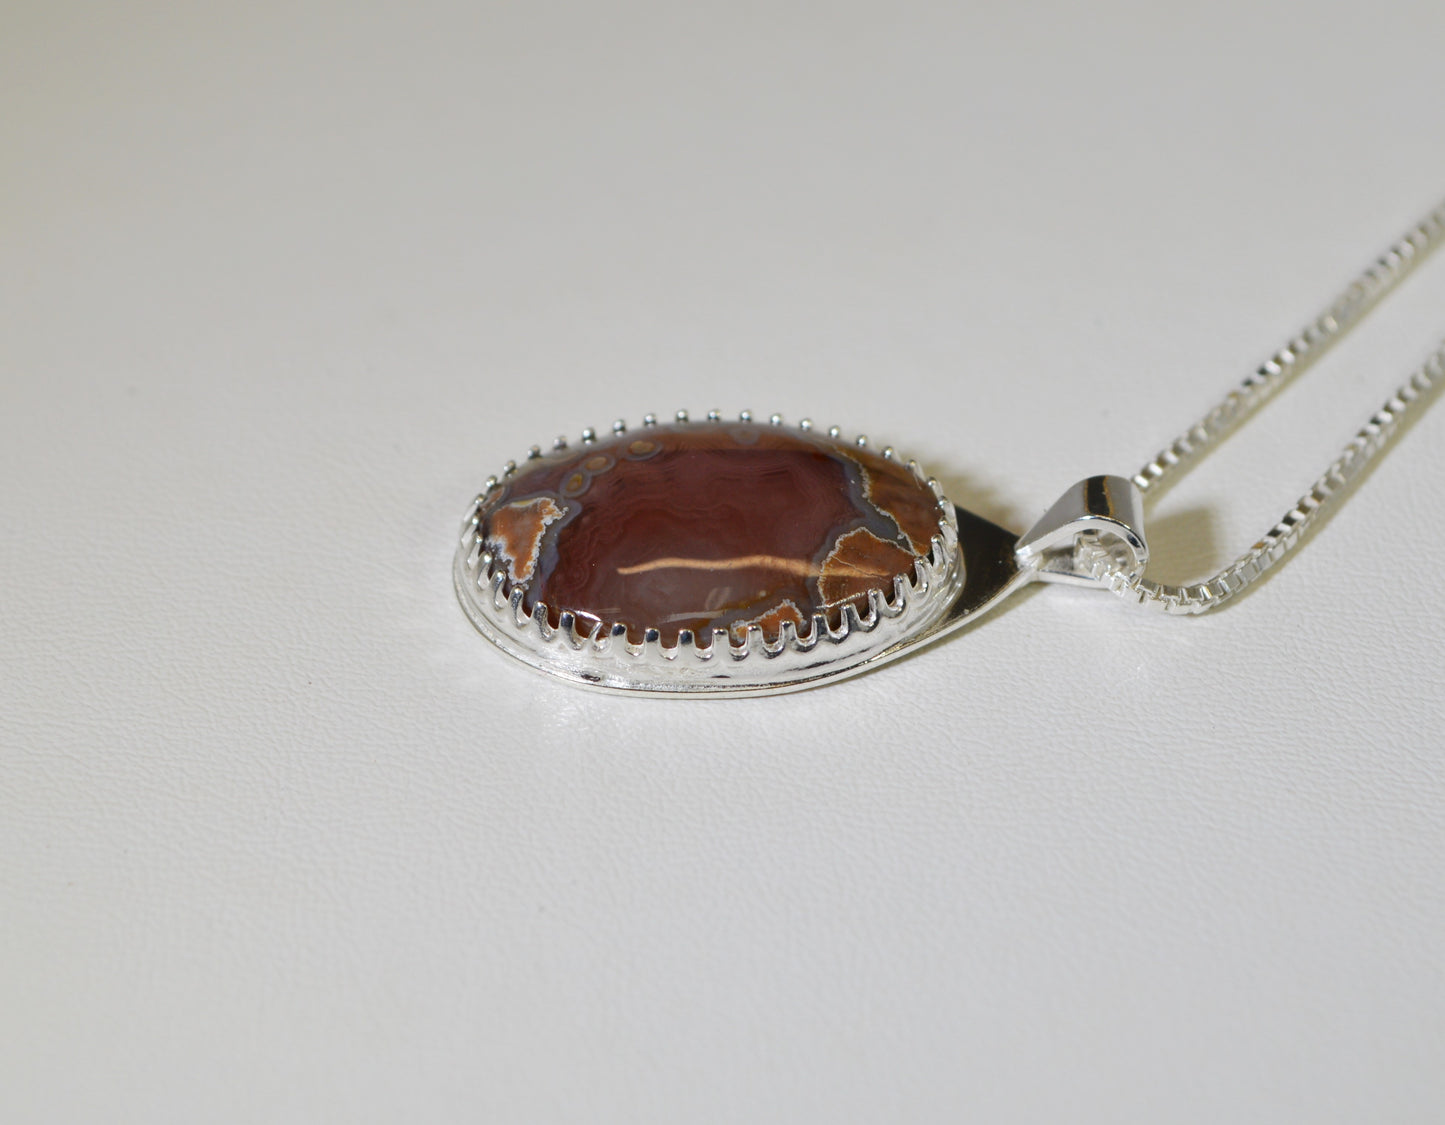 Agate Necklace, Silver Solid 925, Agate Silver Necklace, Baker Thunder Egg, New Mexico Agate Geode, Artisan Handmade Silver Agate Necklace